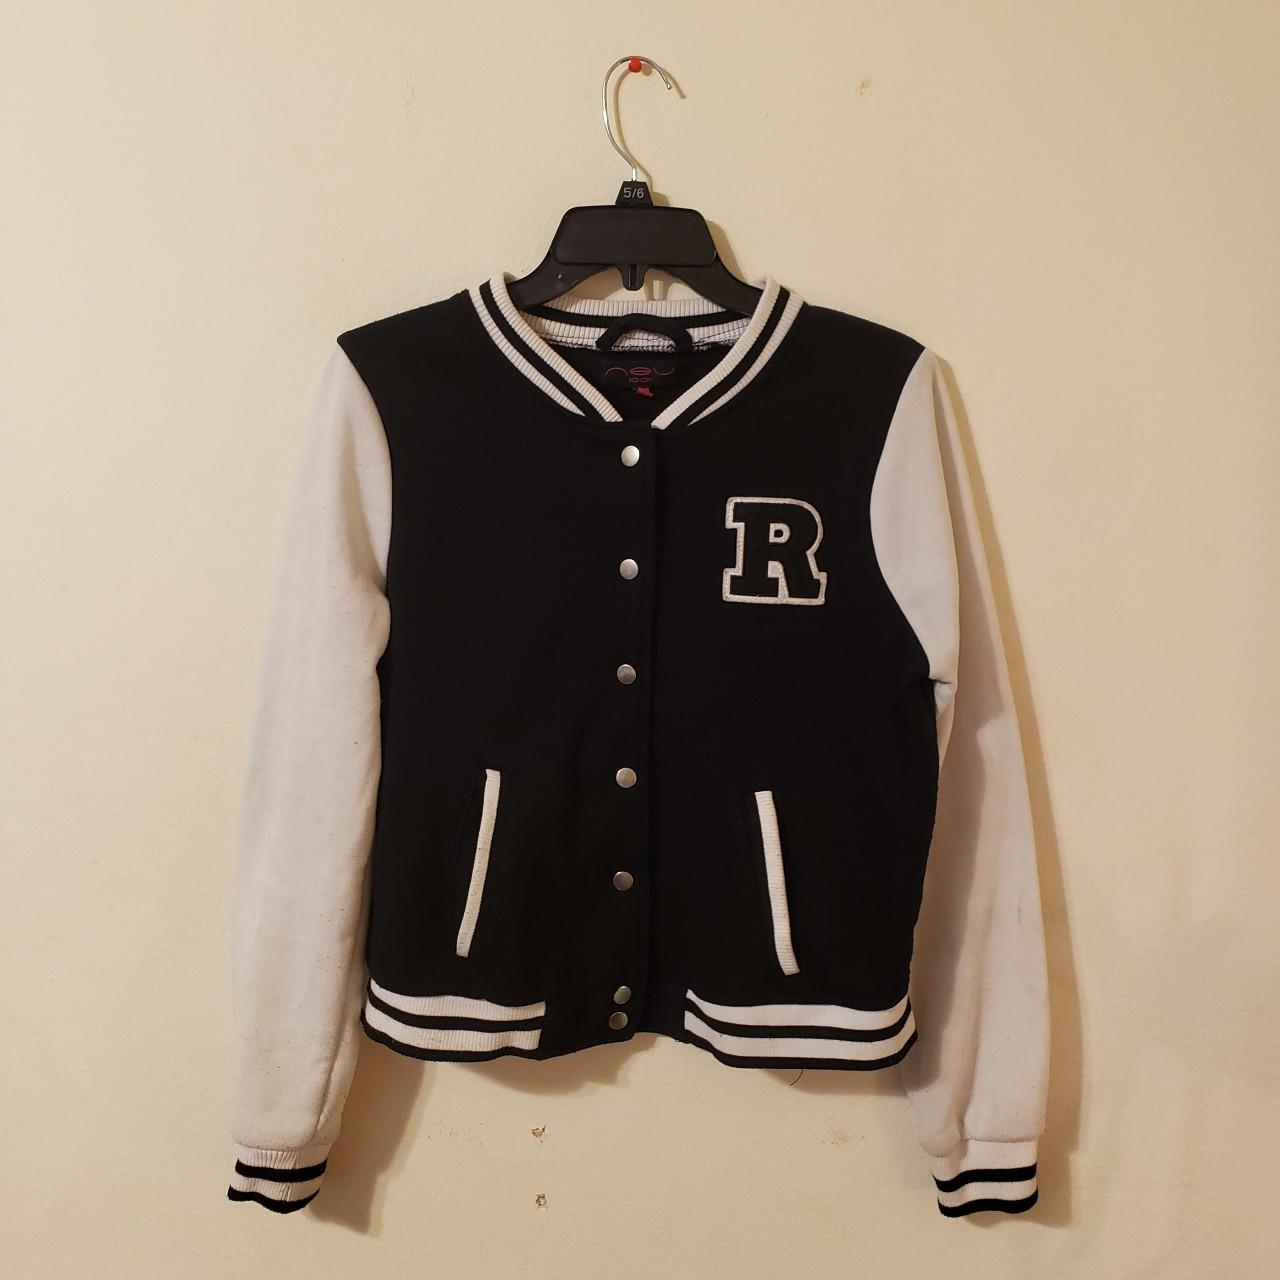 New Look Women's Black and White Jacket